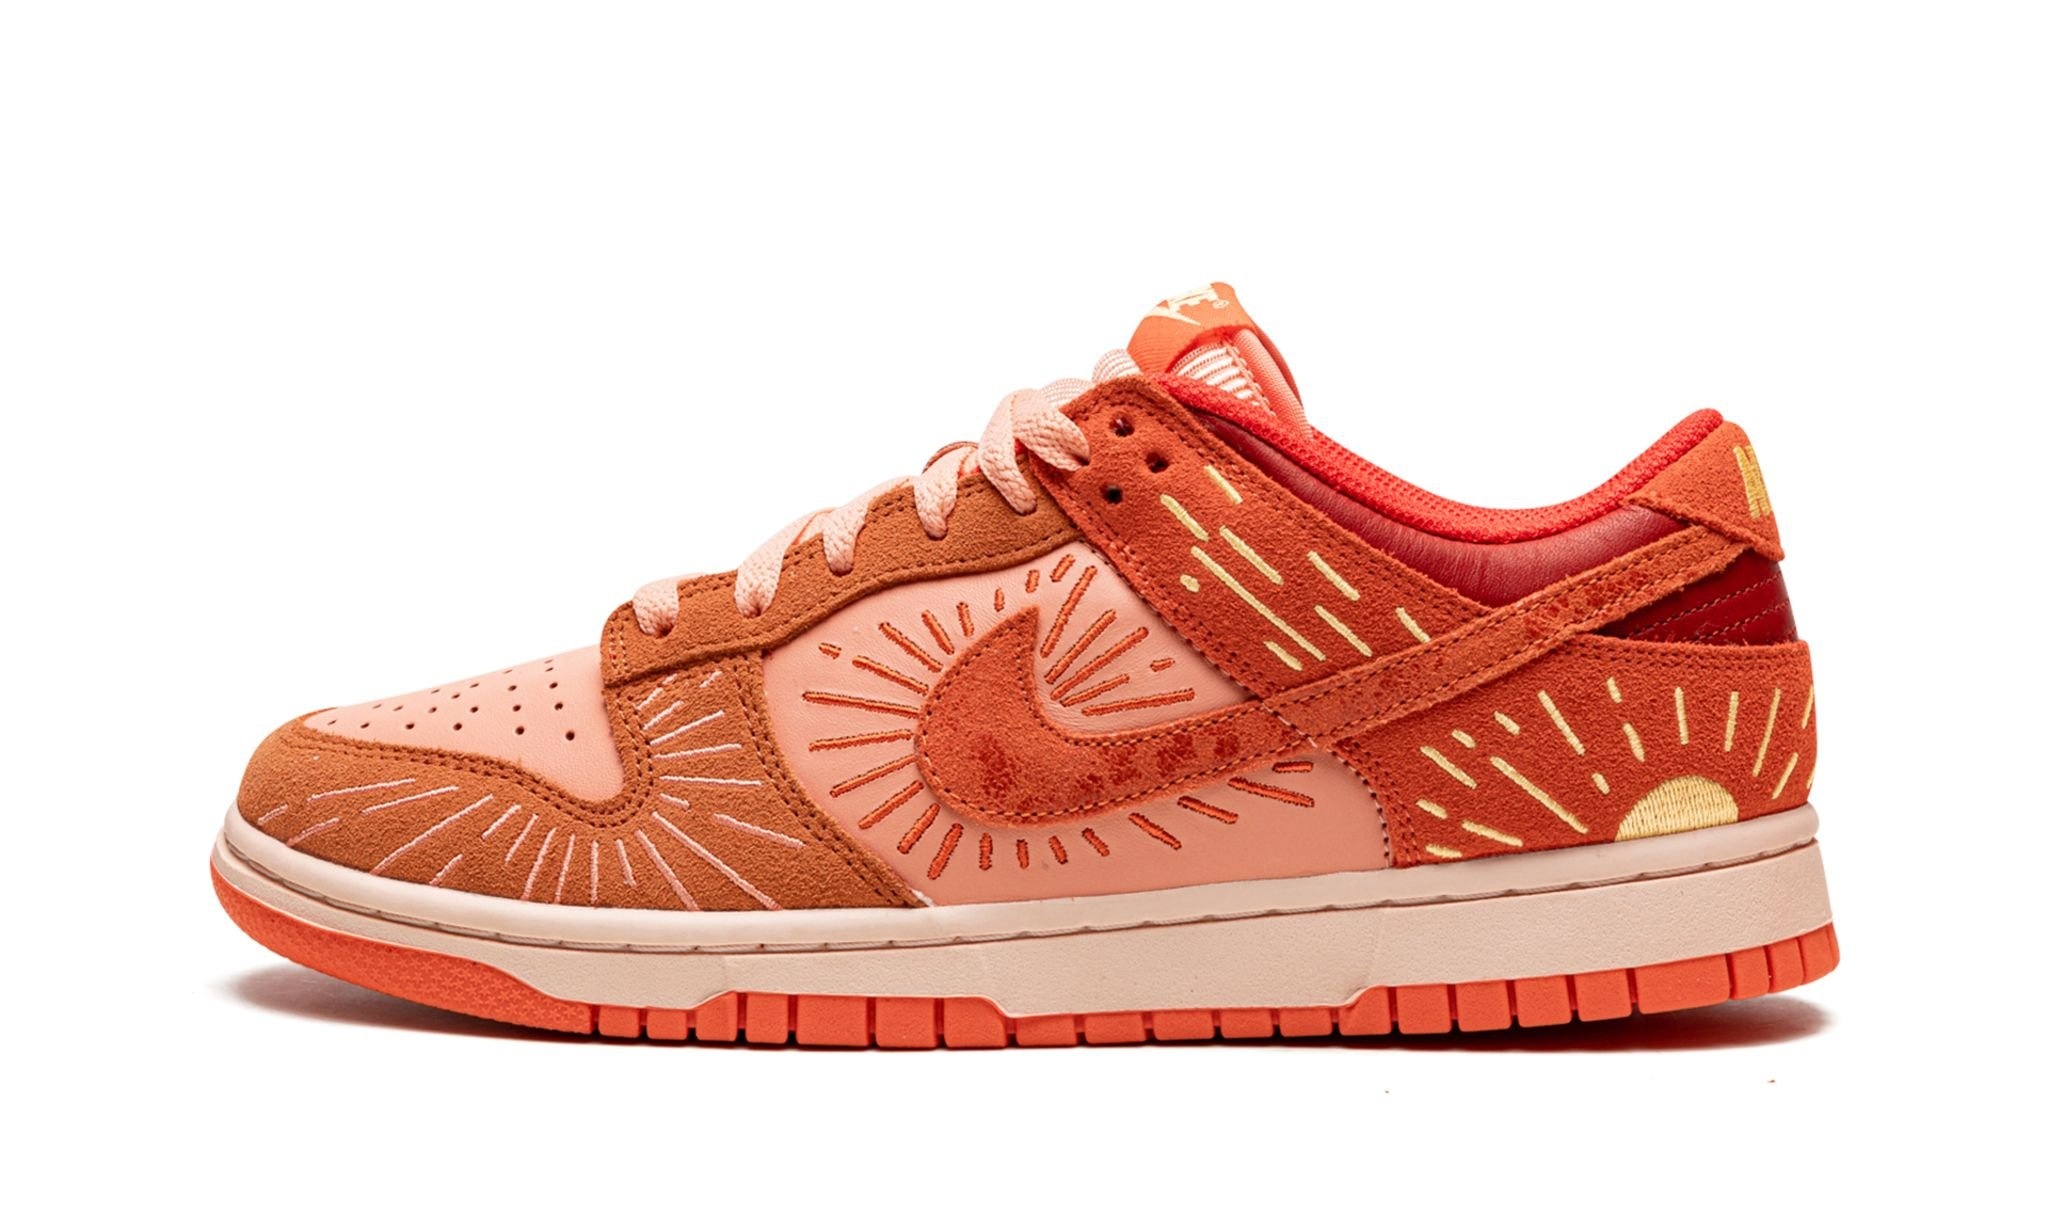 Wmns Nike Dunk Low NH "Winter Solstice" - 1